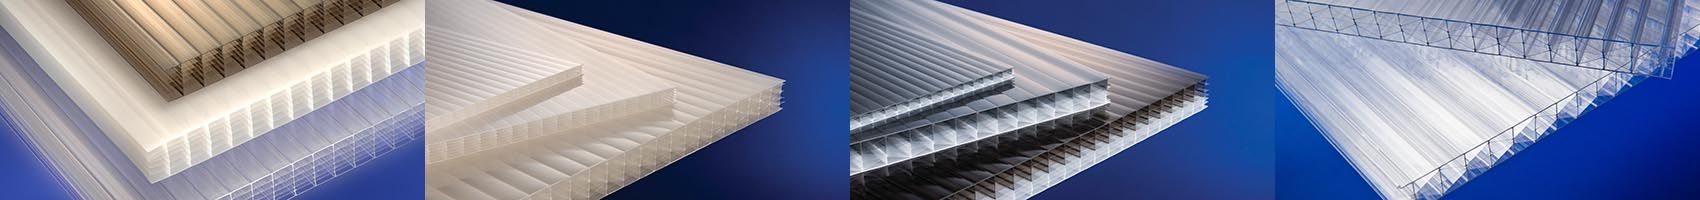 Multiwall Polycarbonate 